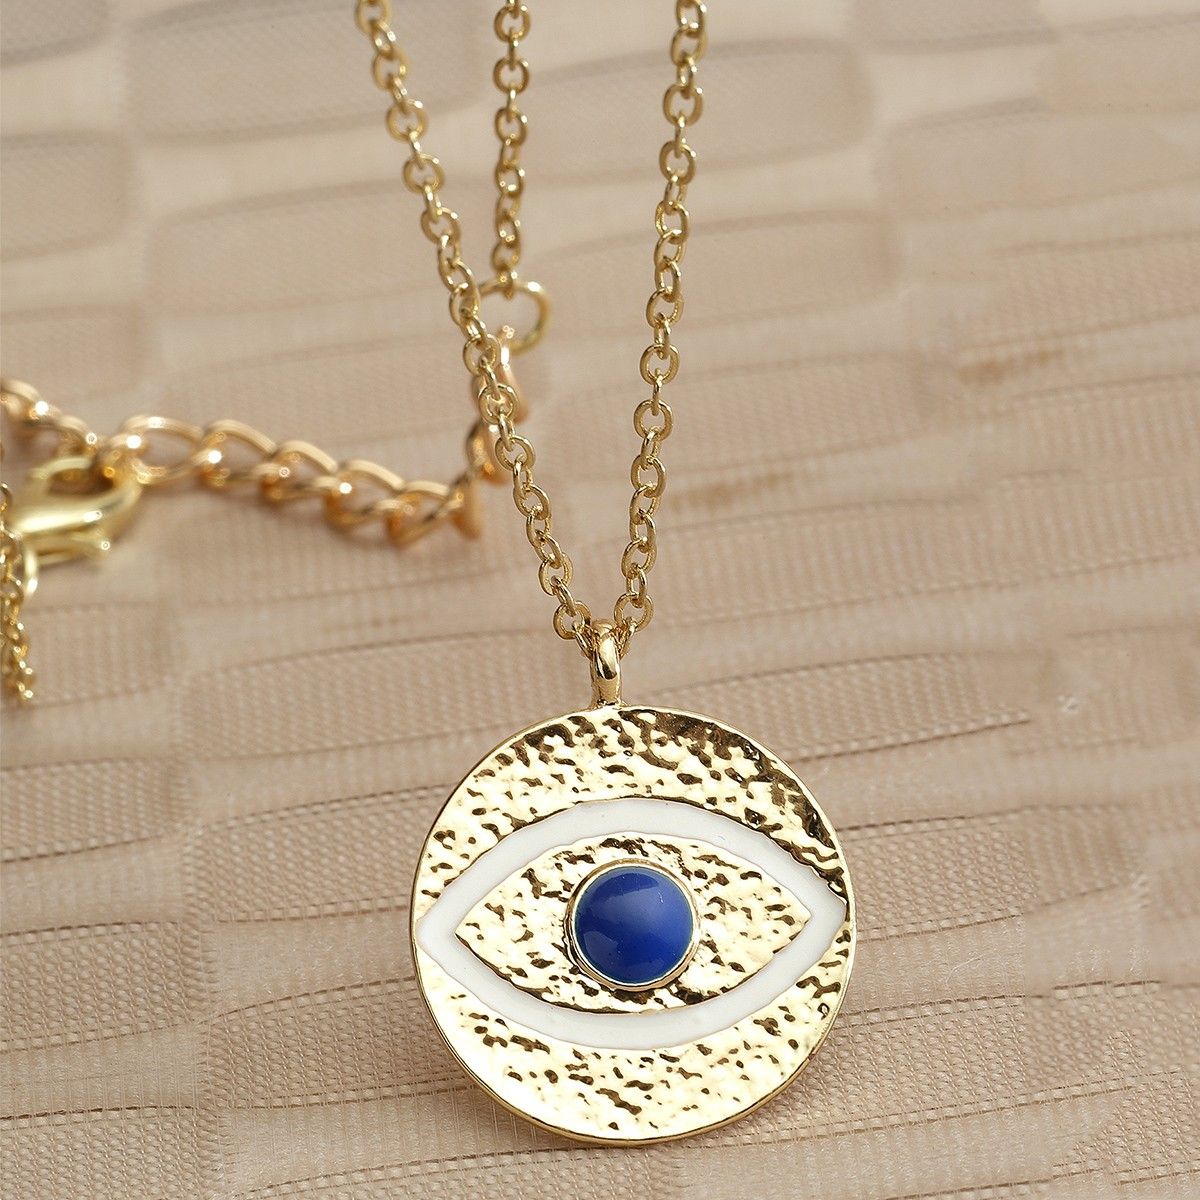 Buy Evil Eye Necklace for Women Online in India